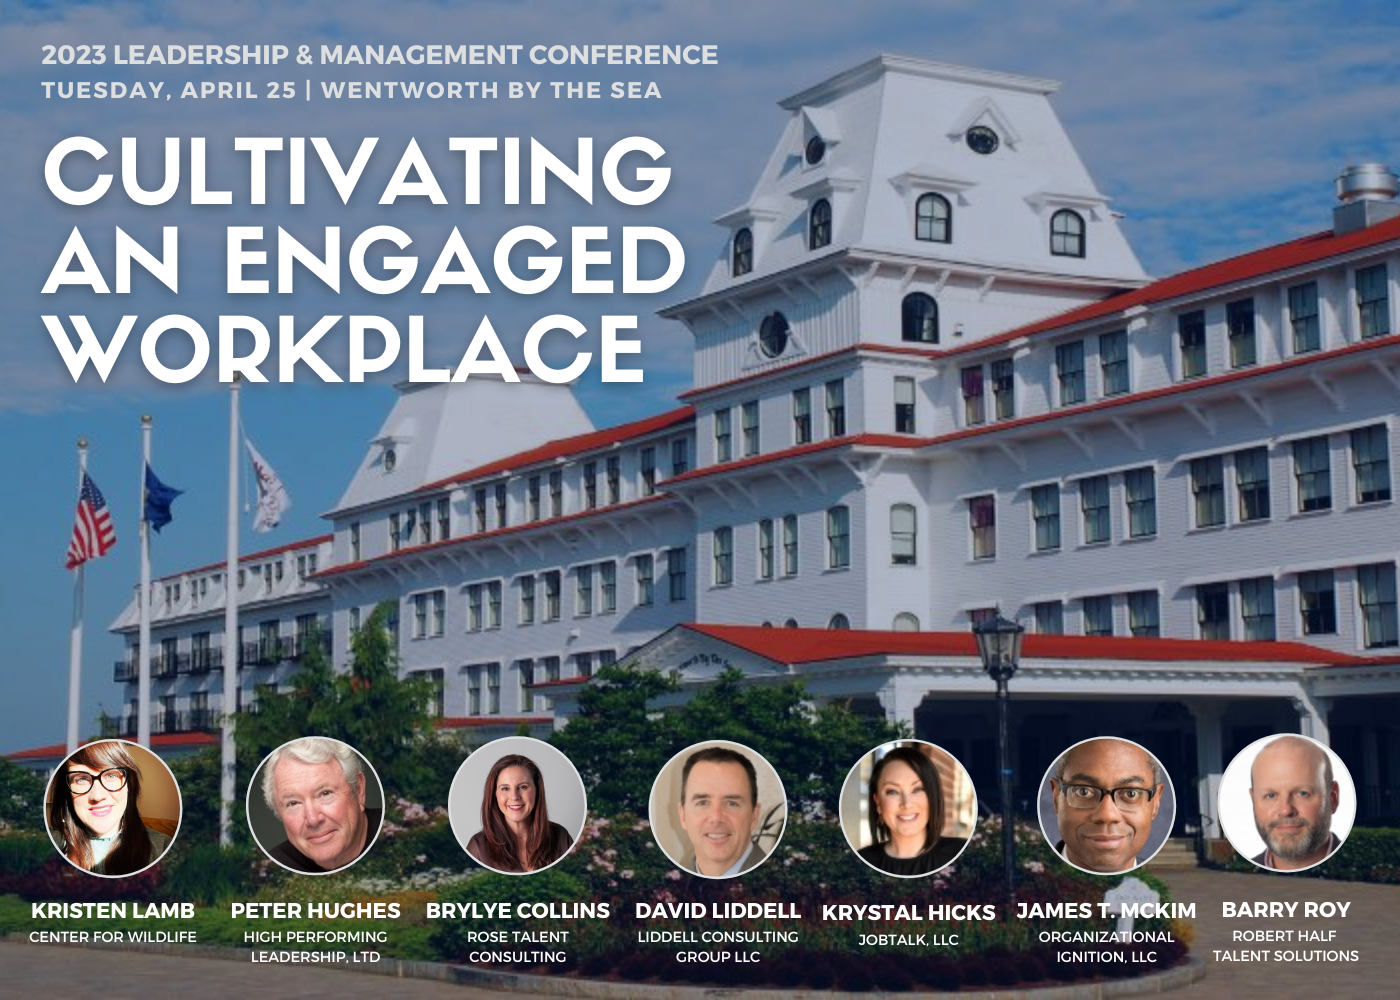 2023 Leadership & Management Conference: Cultivating an Engaged Workplace